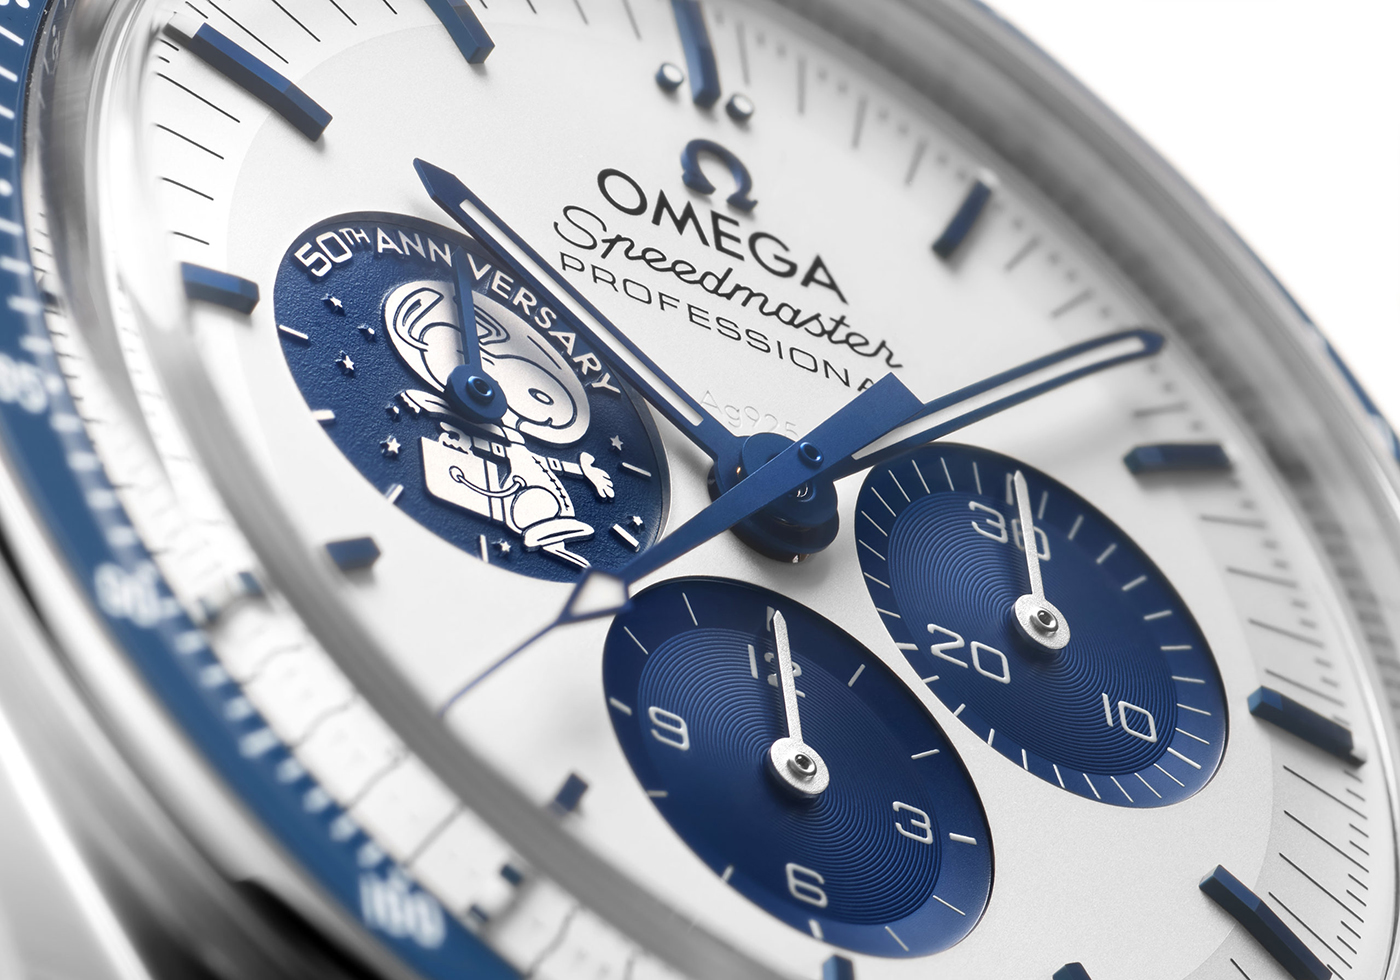 Omega Celebrates The Silver Snoopy Award's 50th Anniversary With New Speedmaster  Moonwatch